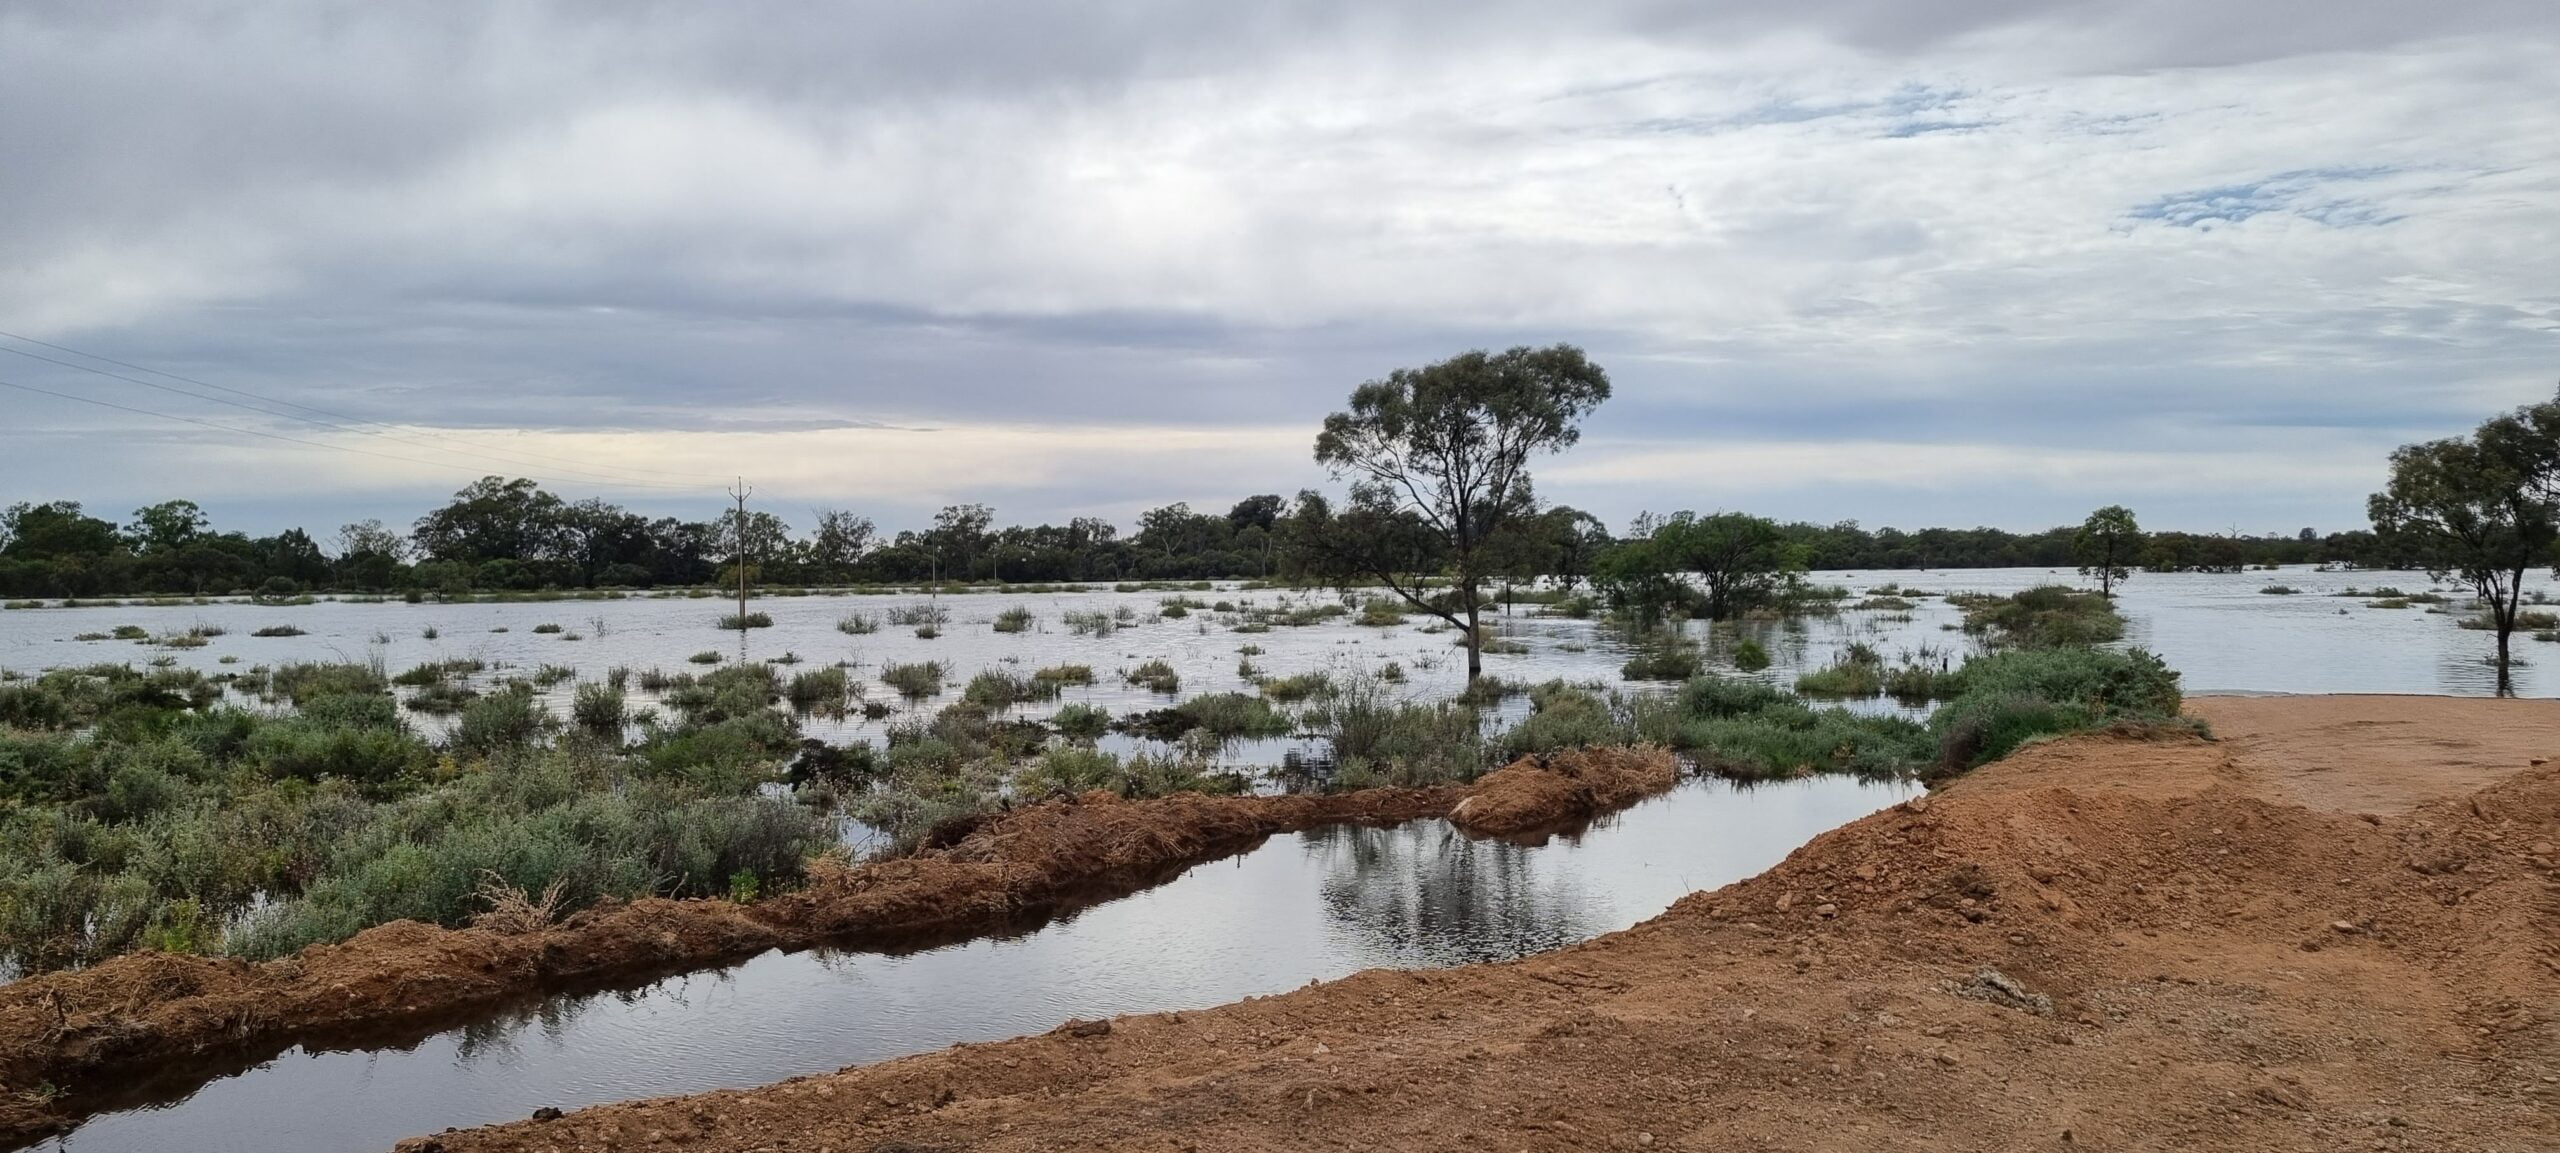 A floodplain near Renmark is inundated with water under a grey, overcast sky. A single tree can be seen standing in the centre of the floodplain.